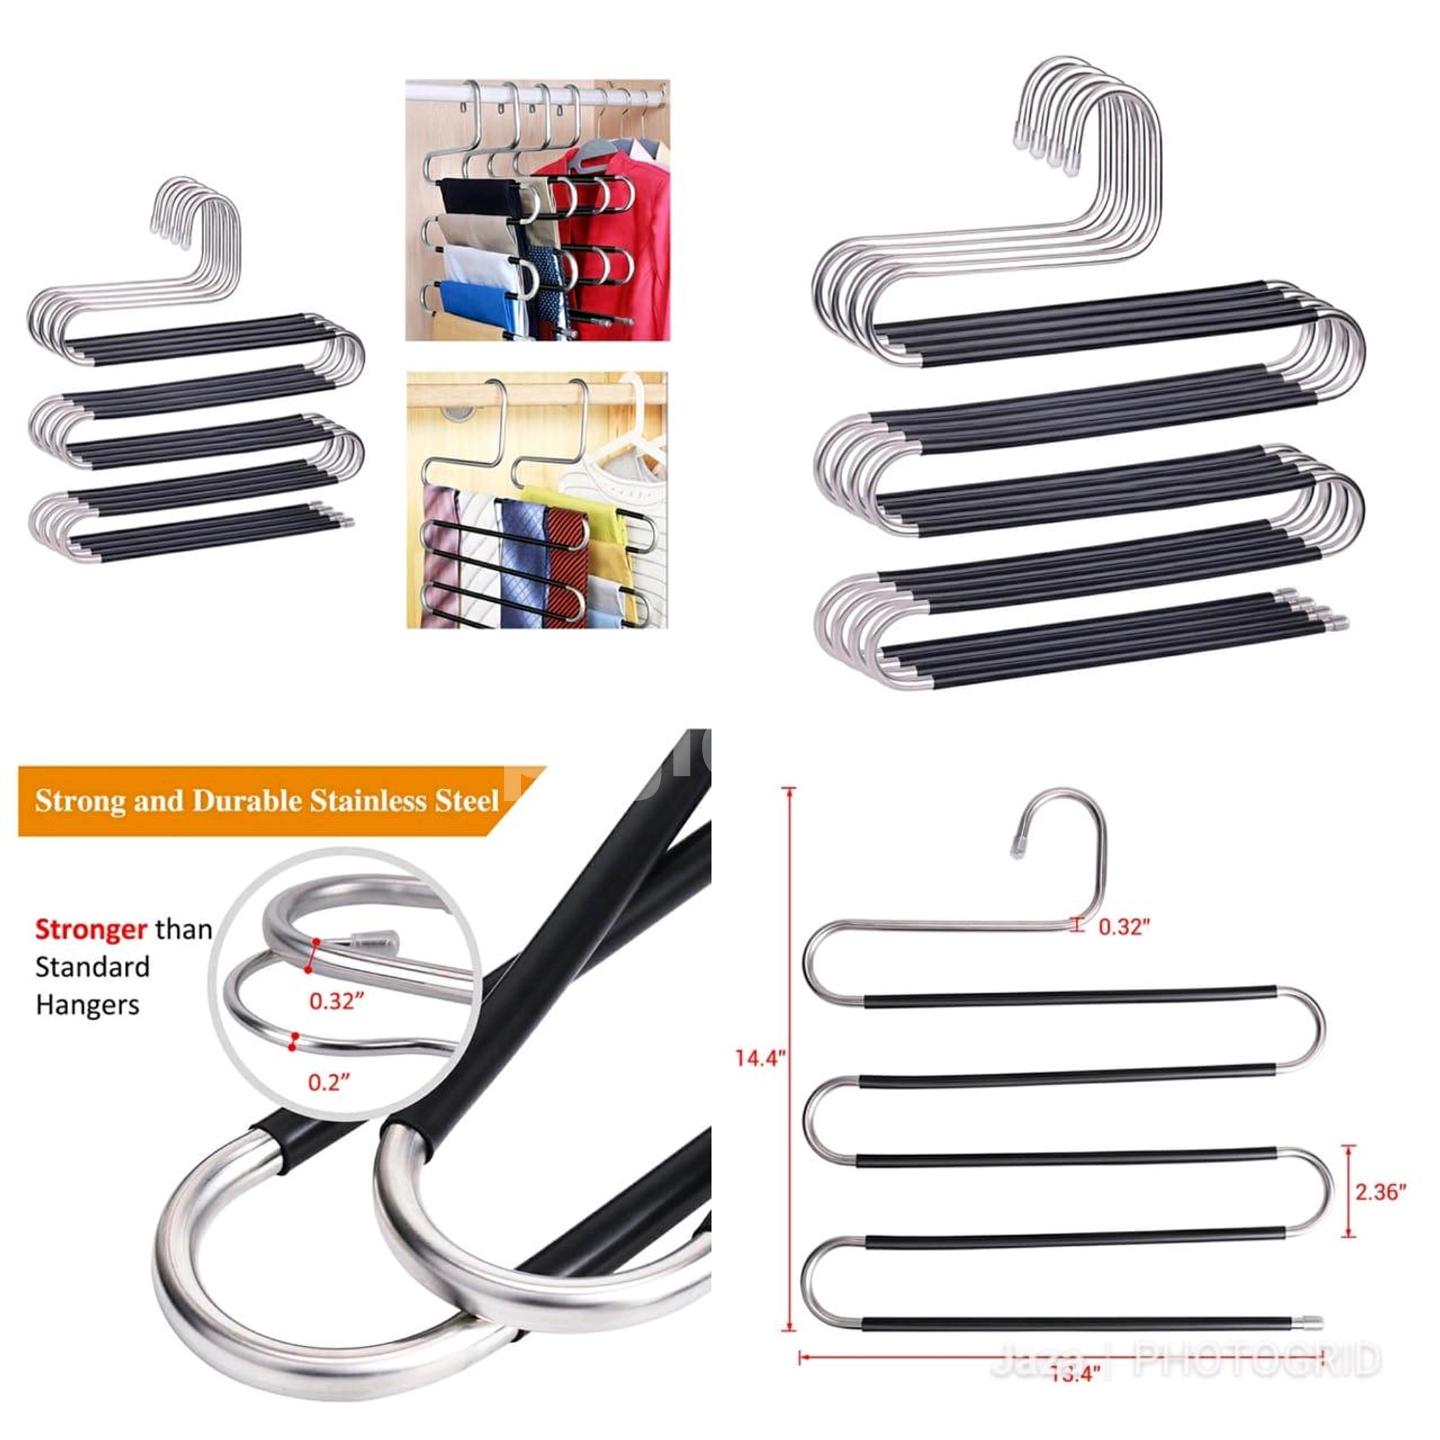 S-SHAPED HANGERS WITH ANTISLIP COATING | PigiaMe